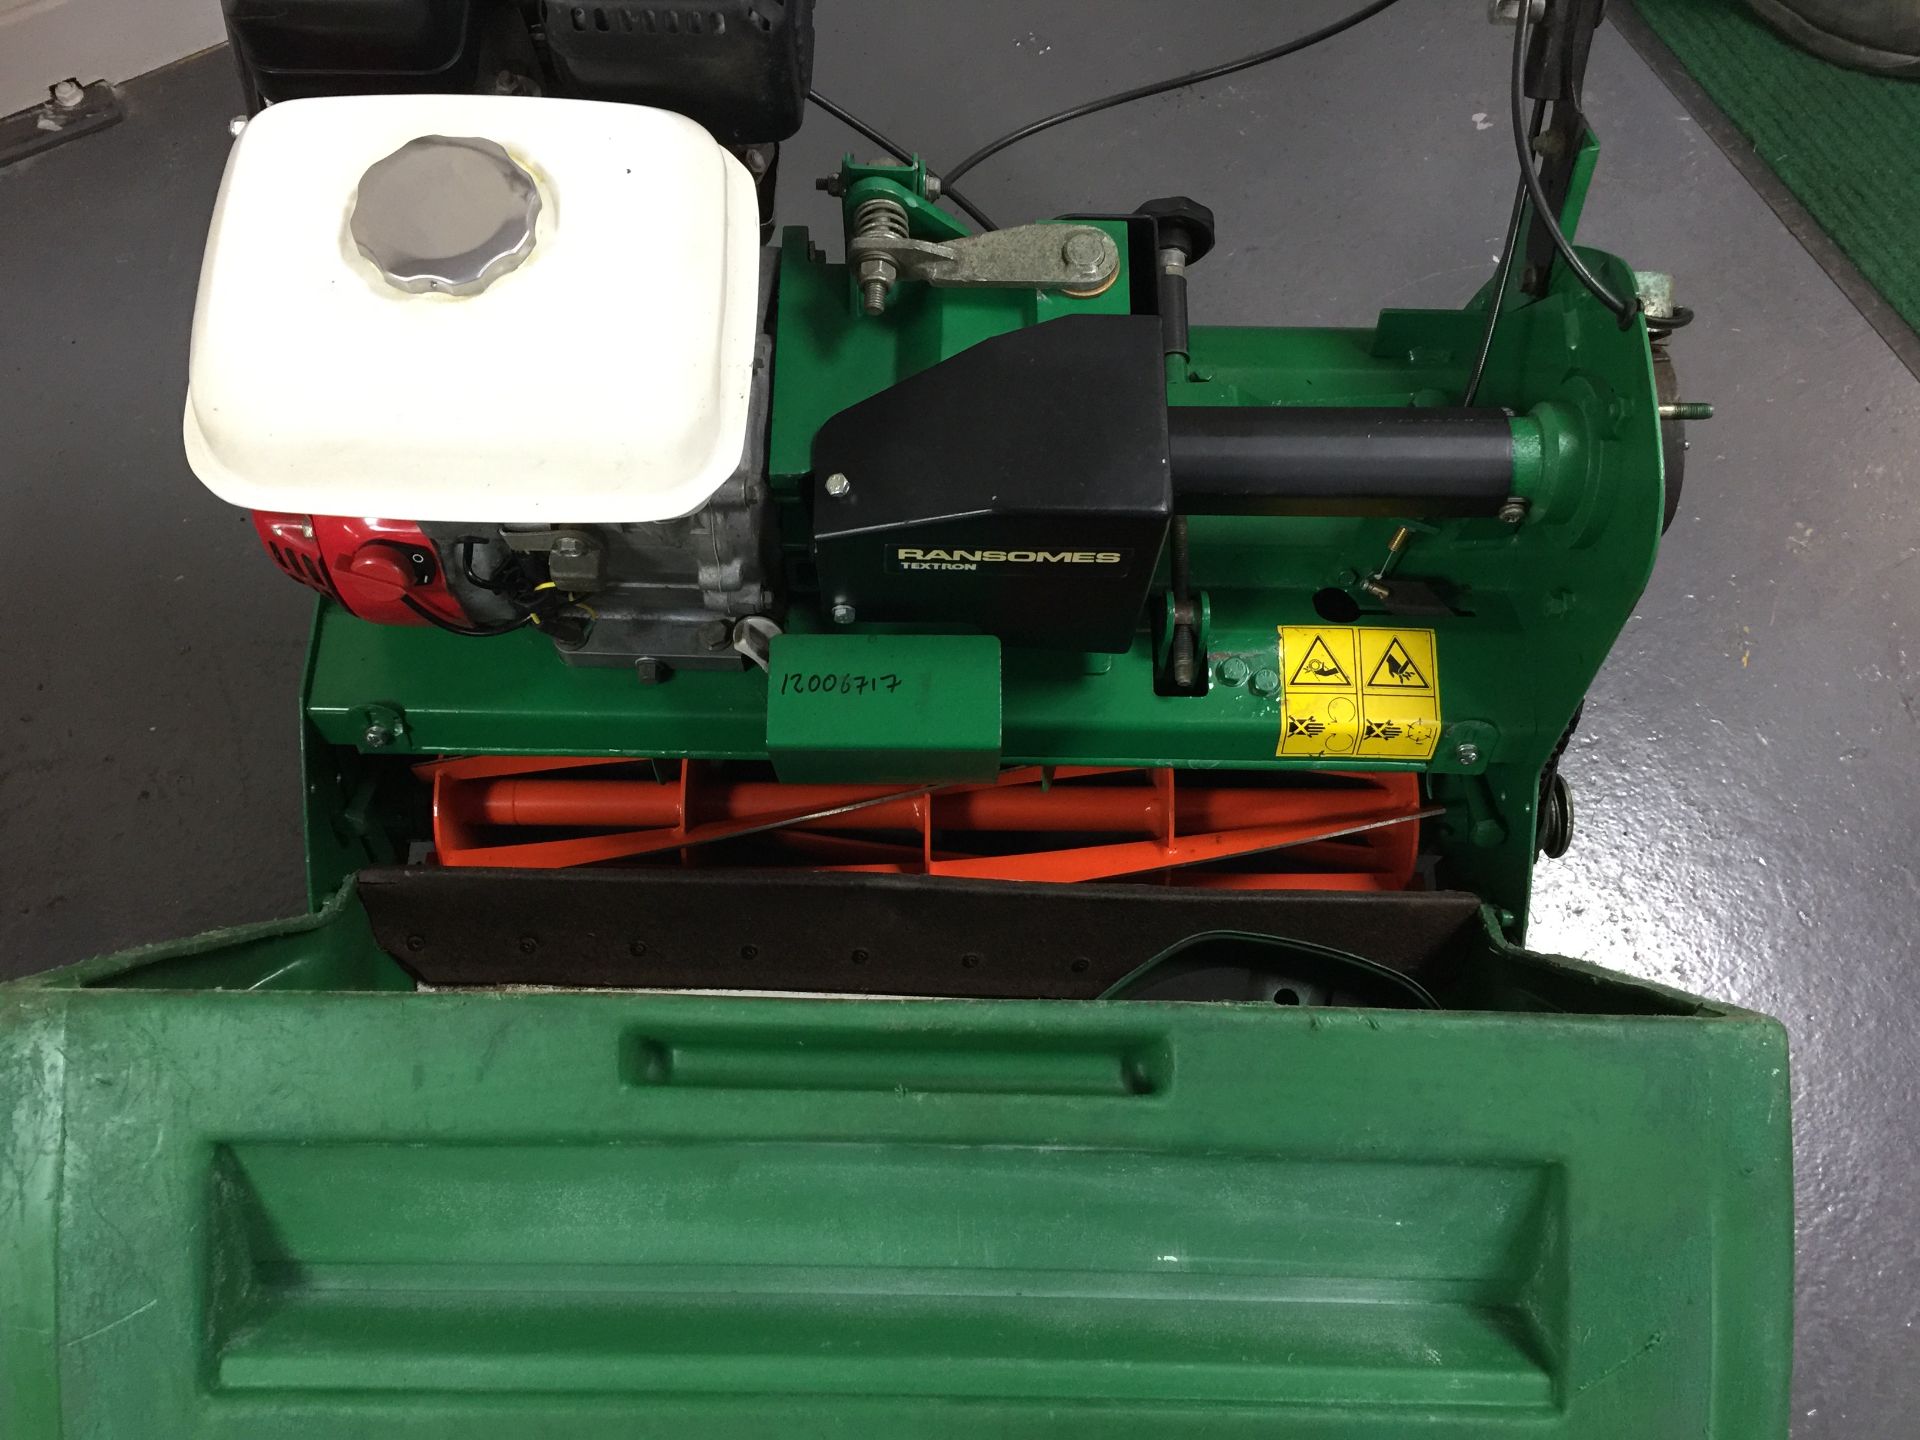 Ransomes Textron Lawn mower - Image 2 of 3